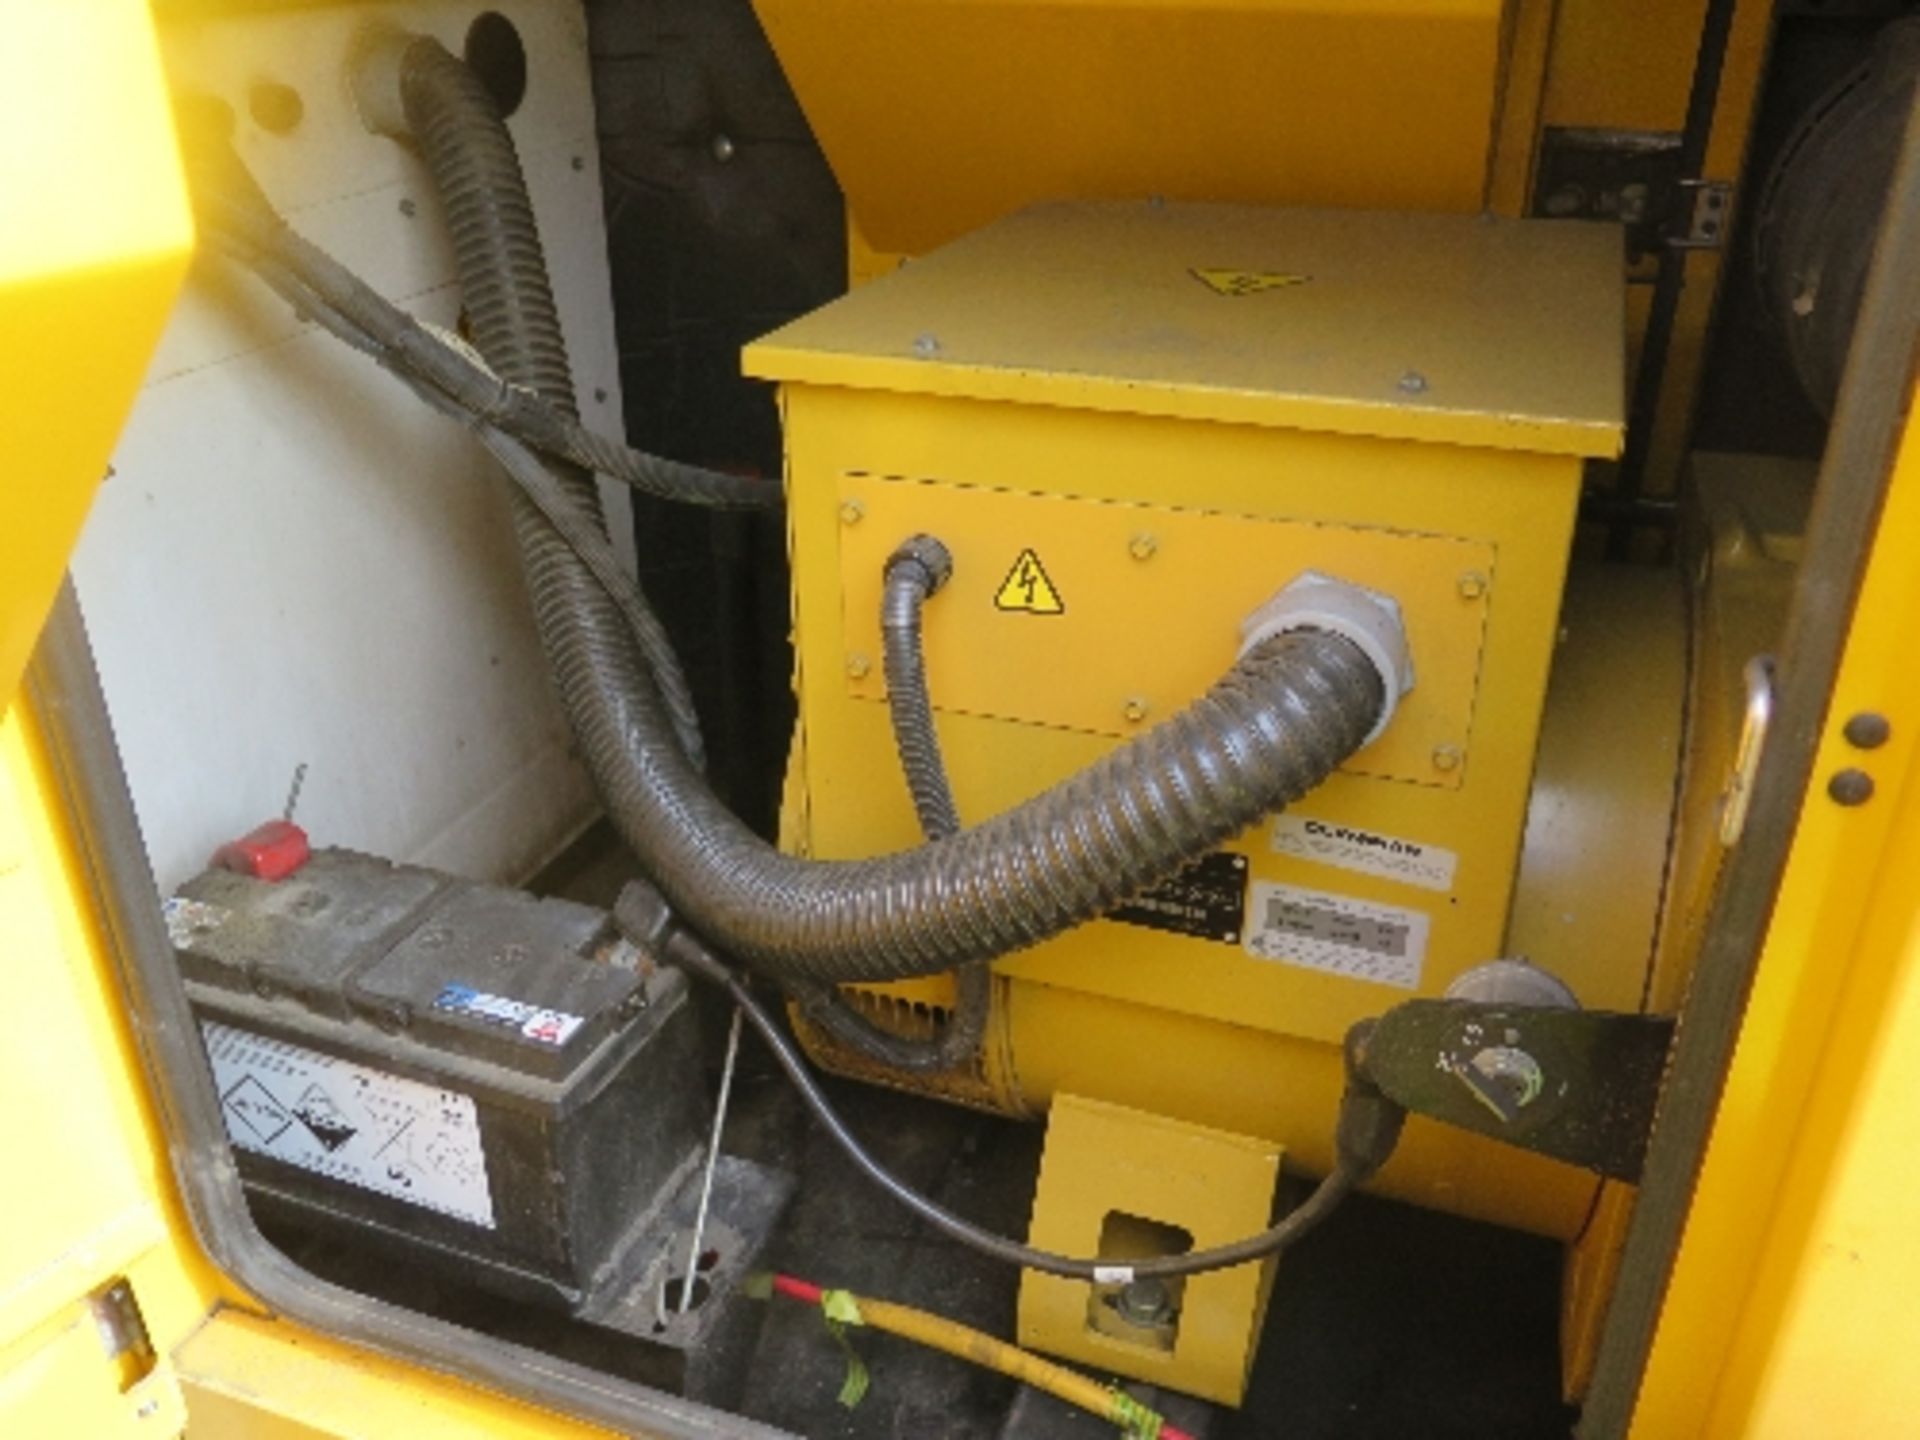 Caterpillar XQE100 generator 15066 hrs 158066
PERKINS - RUNS AND MAKES POWER
ALL LOTS are SOLD - Image 6 of 7